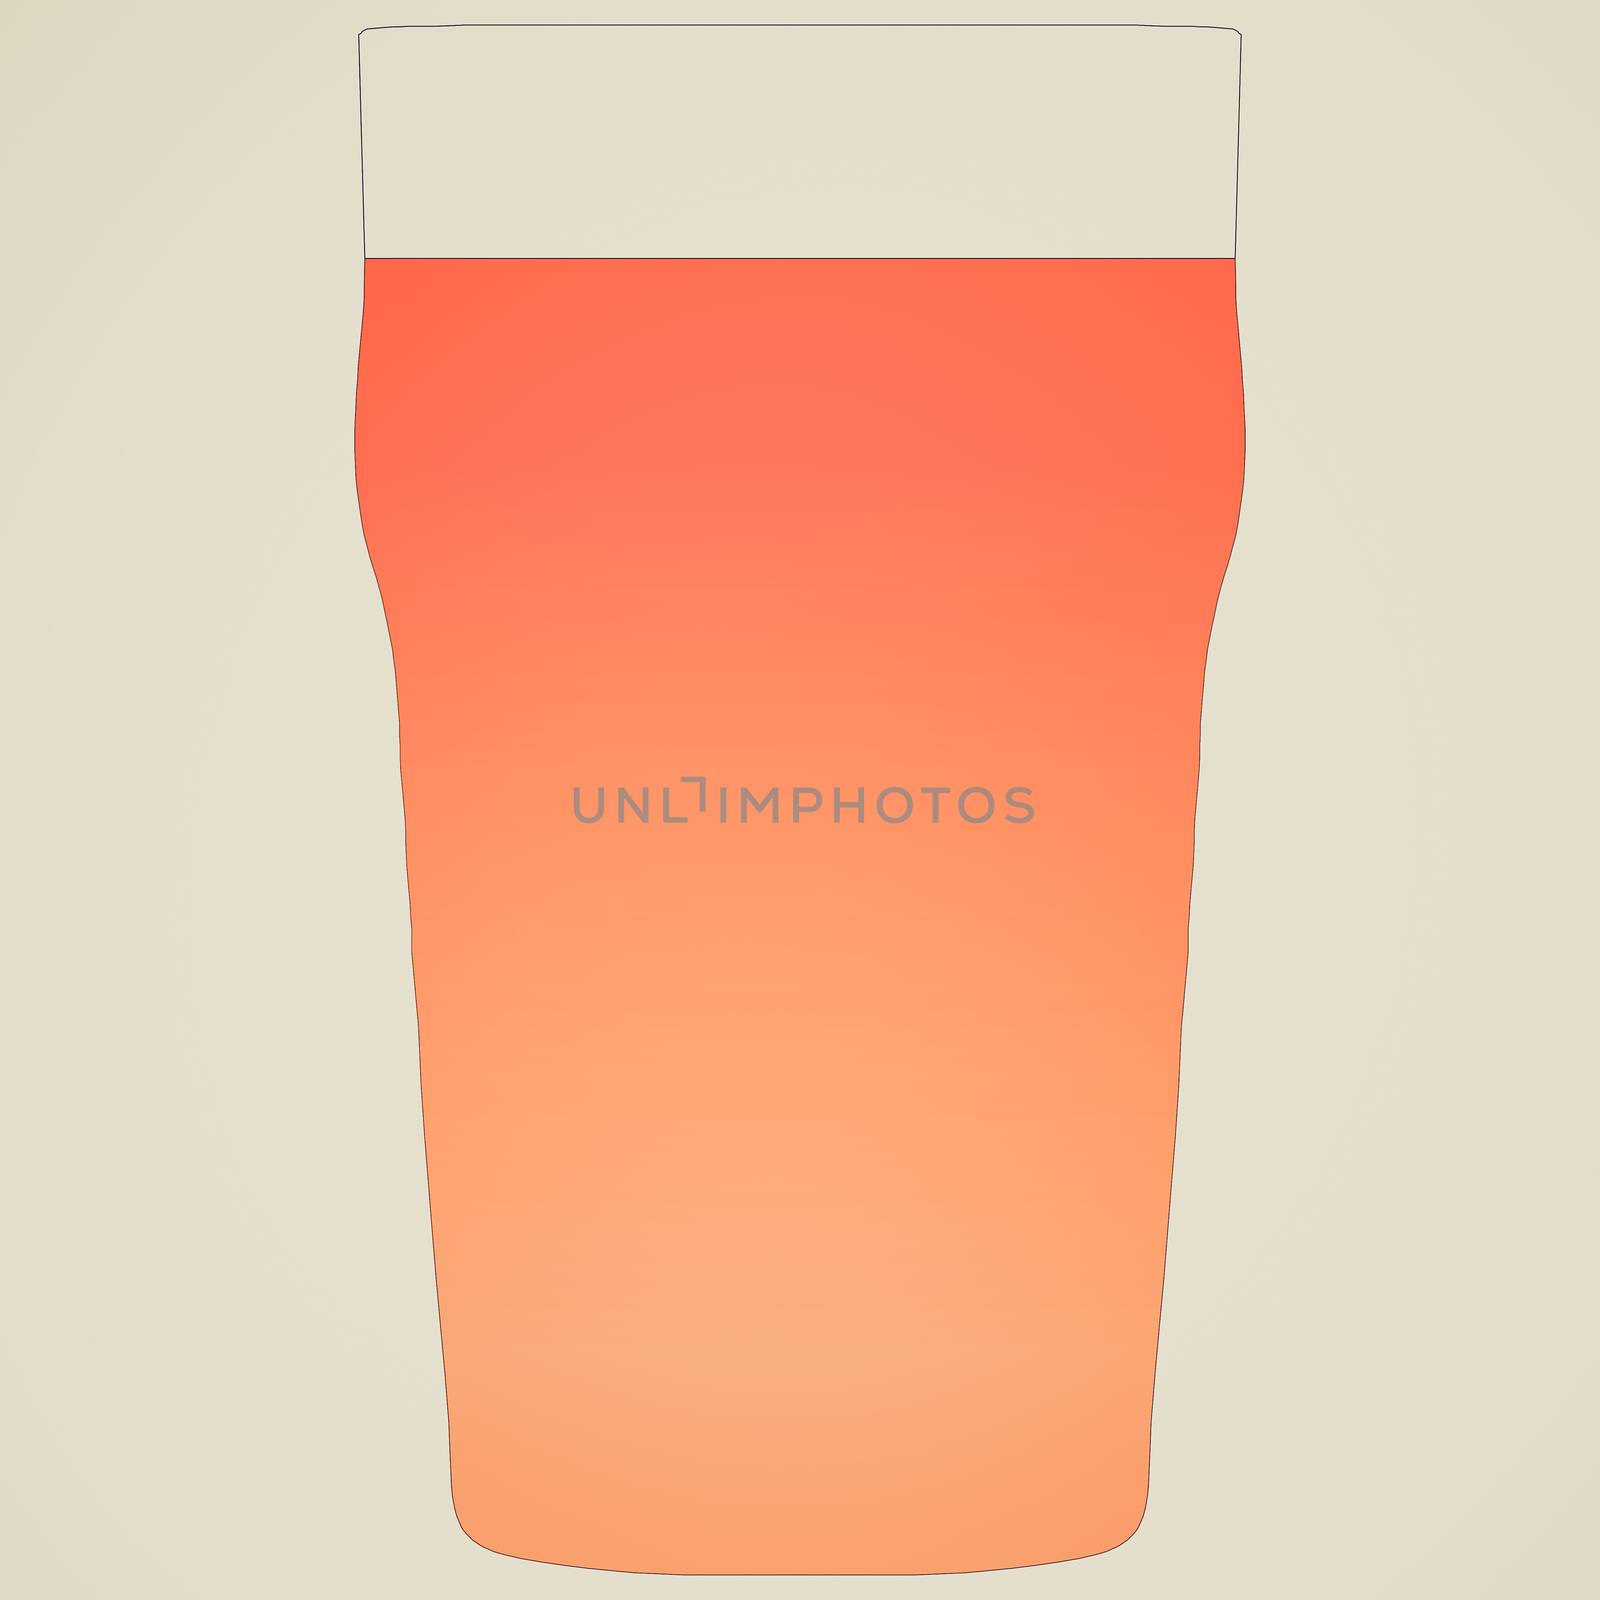 Retro looking Illustration of a pint of bitter beer